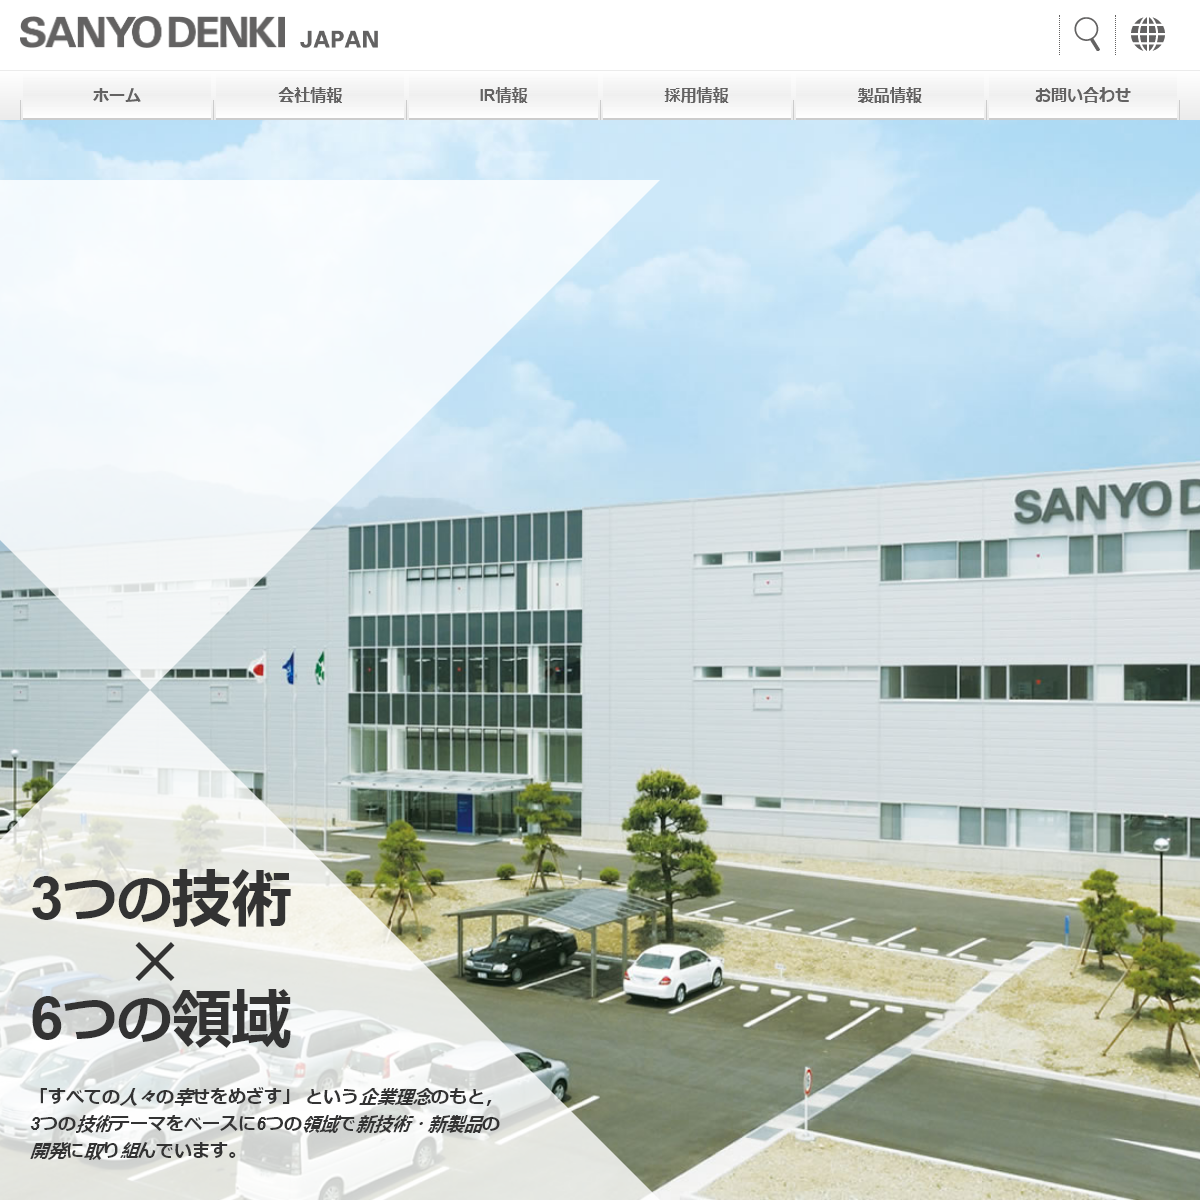 A complete backup of sanyodenki.co.jp